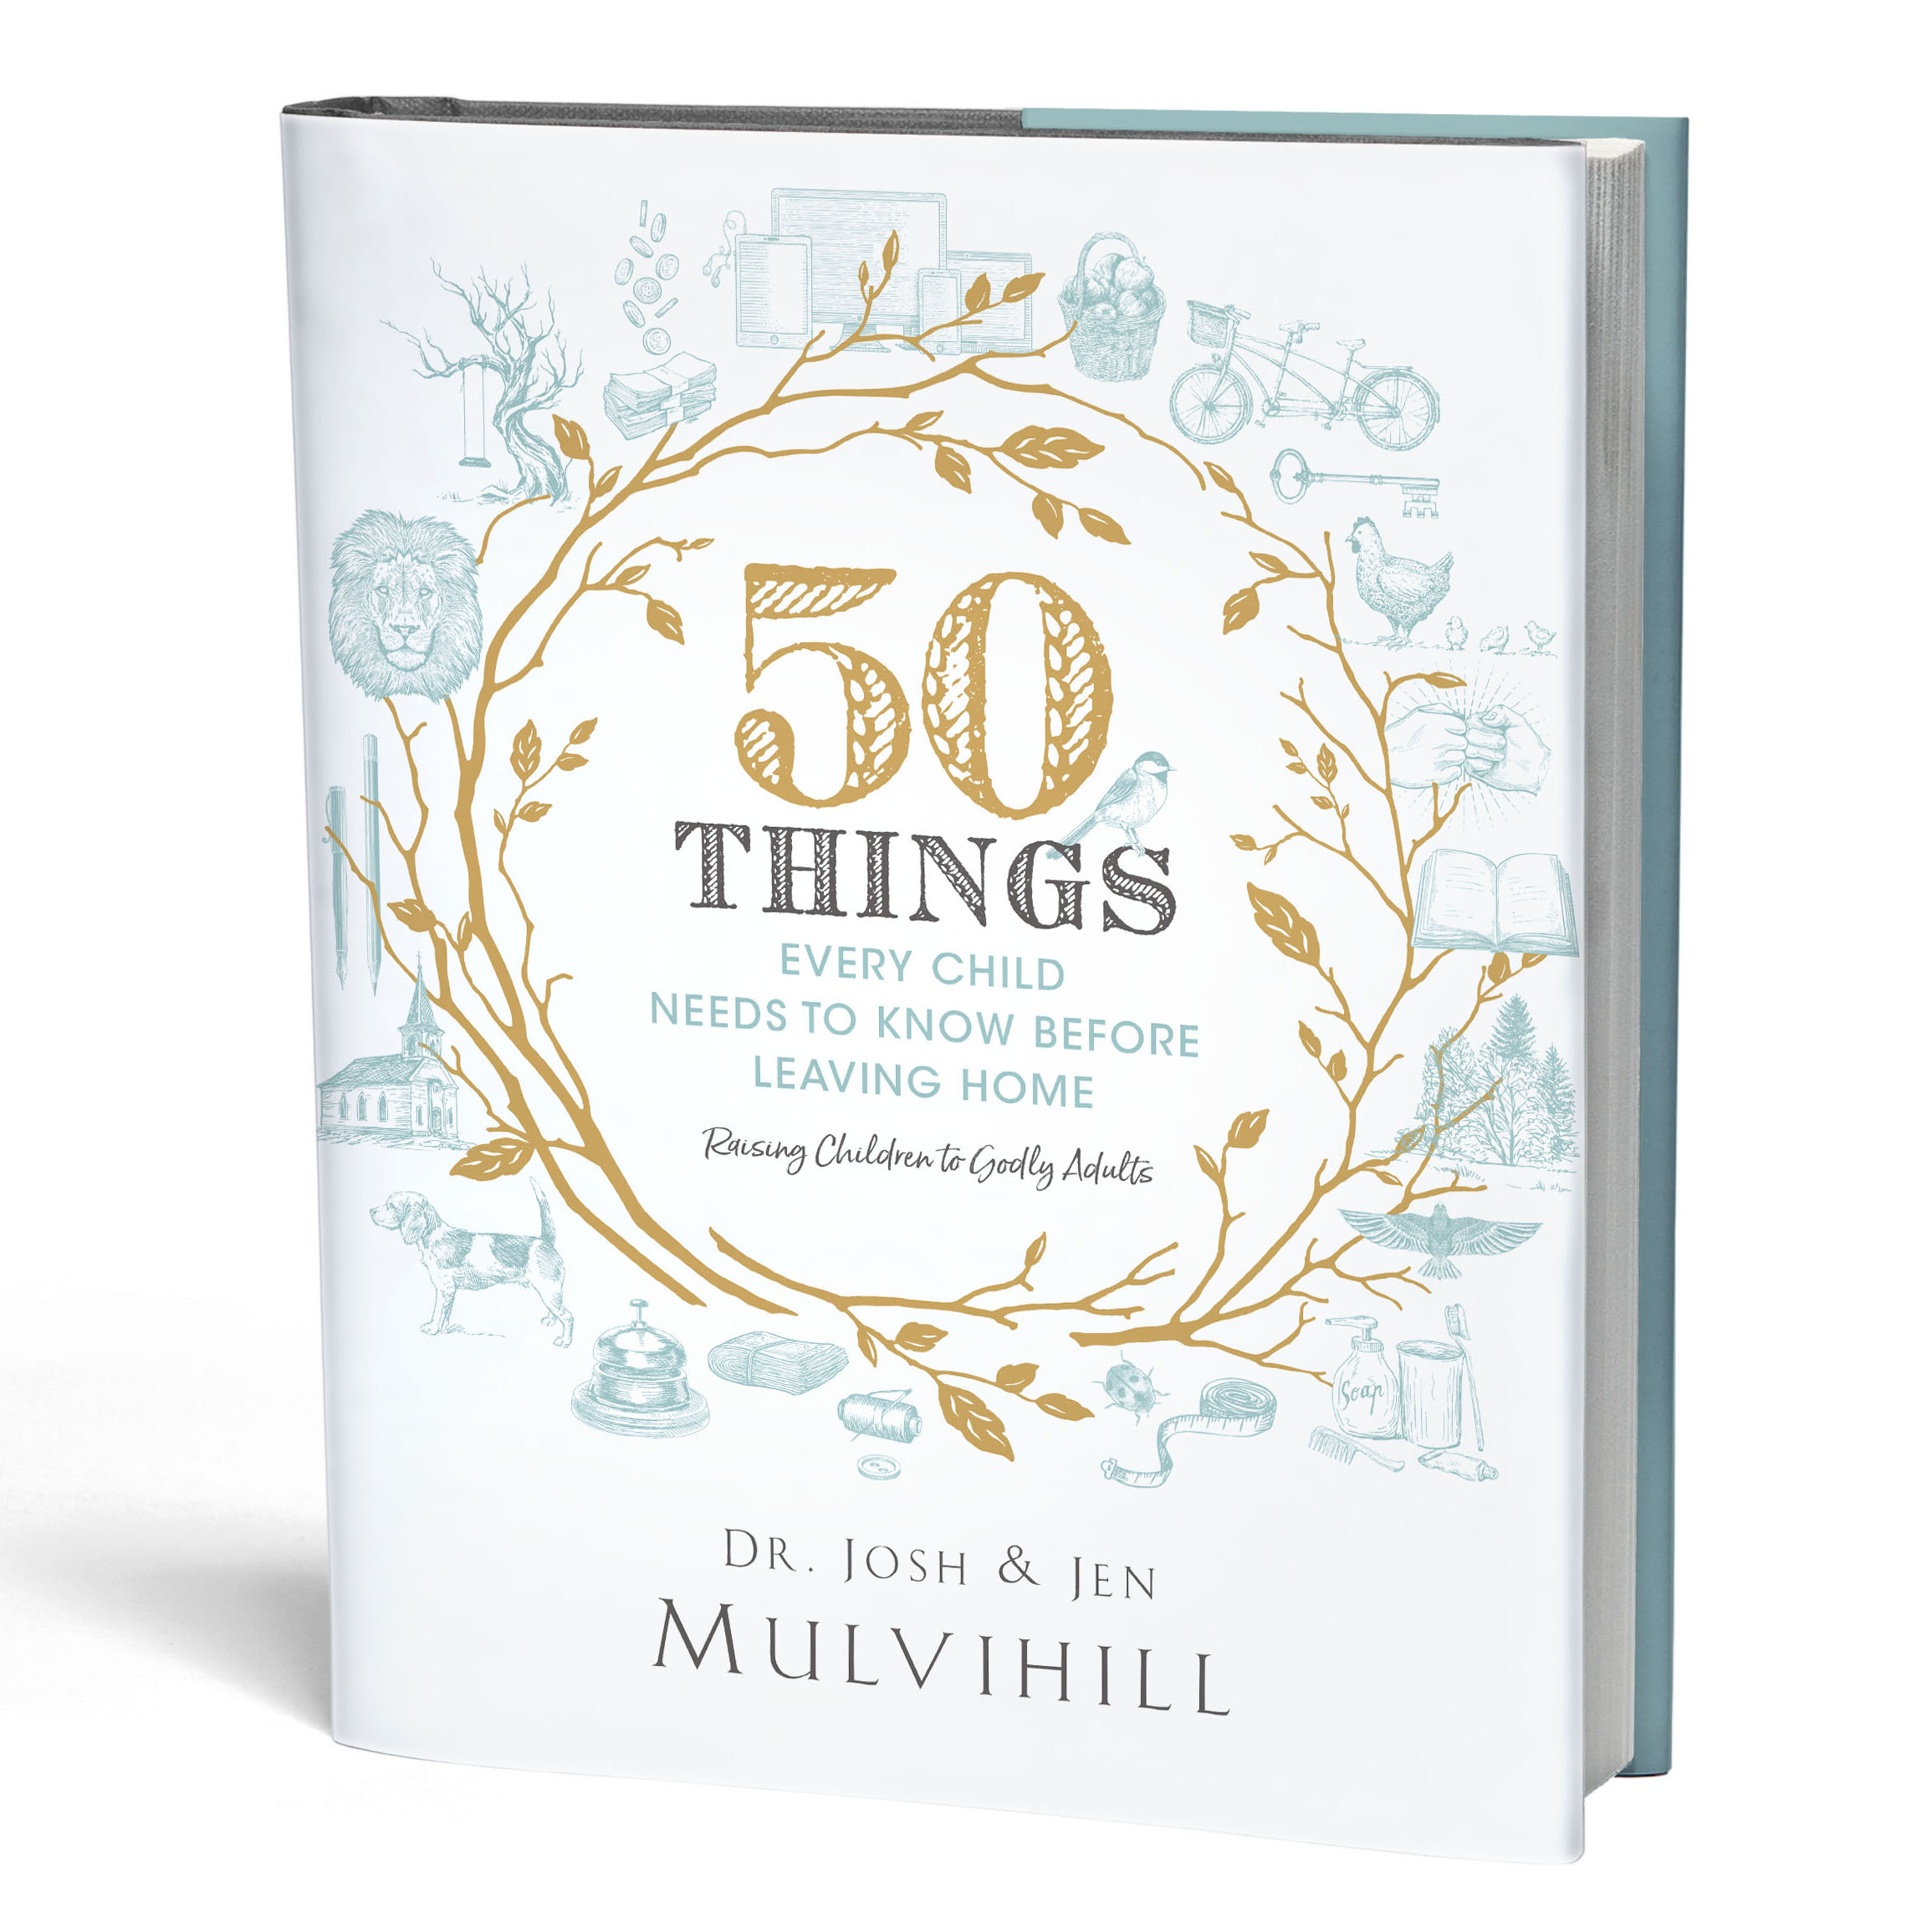 50 Things Every Child Needs to Know